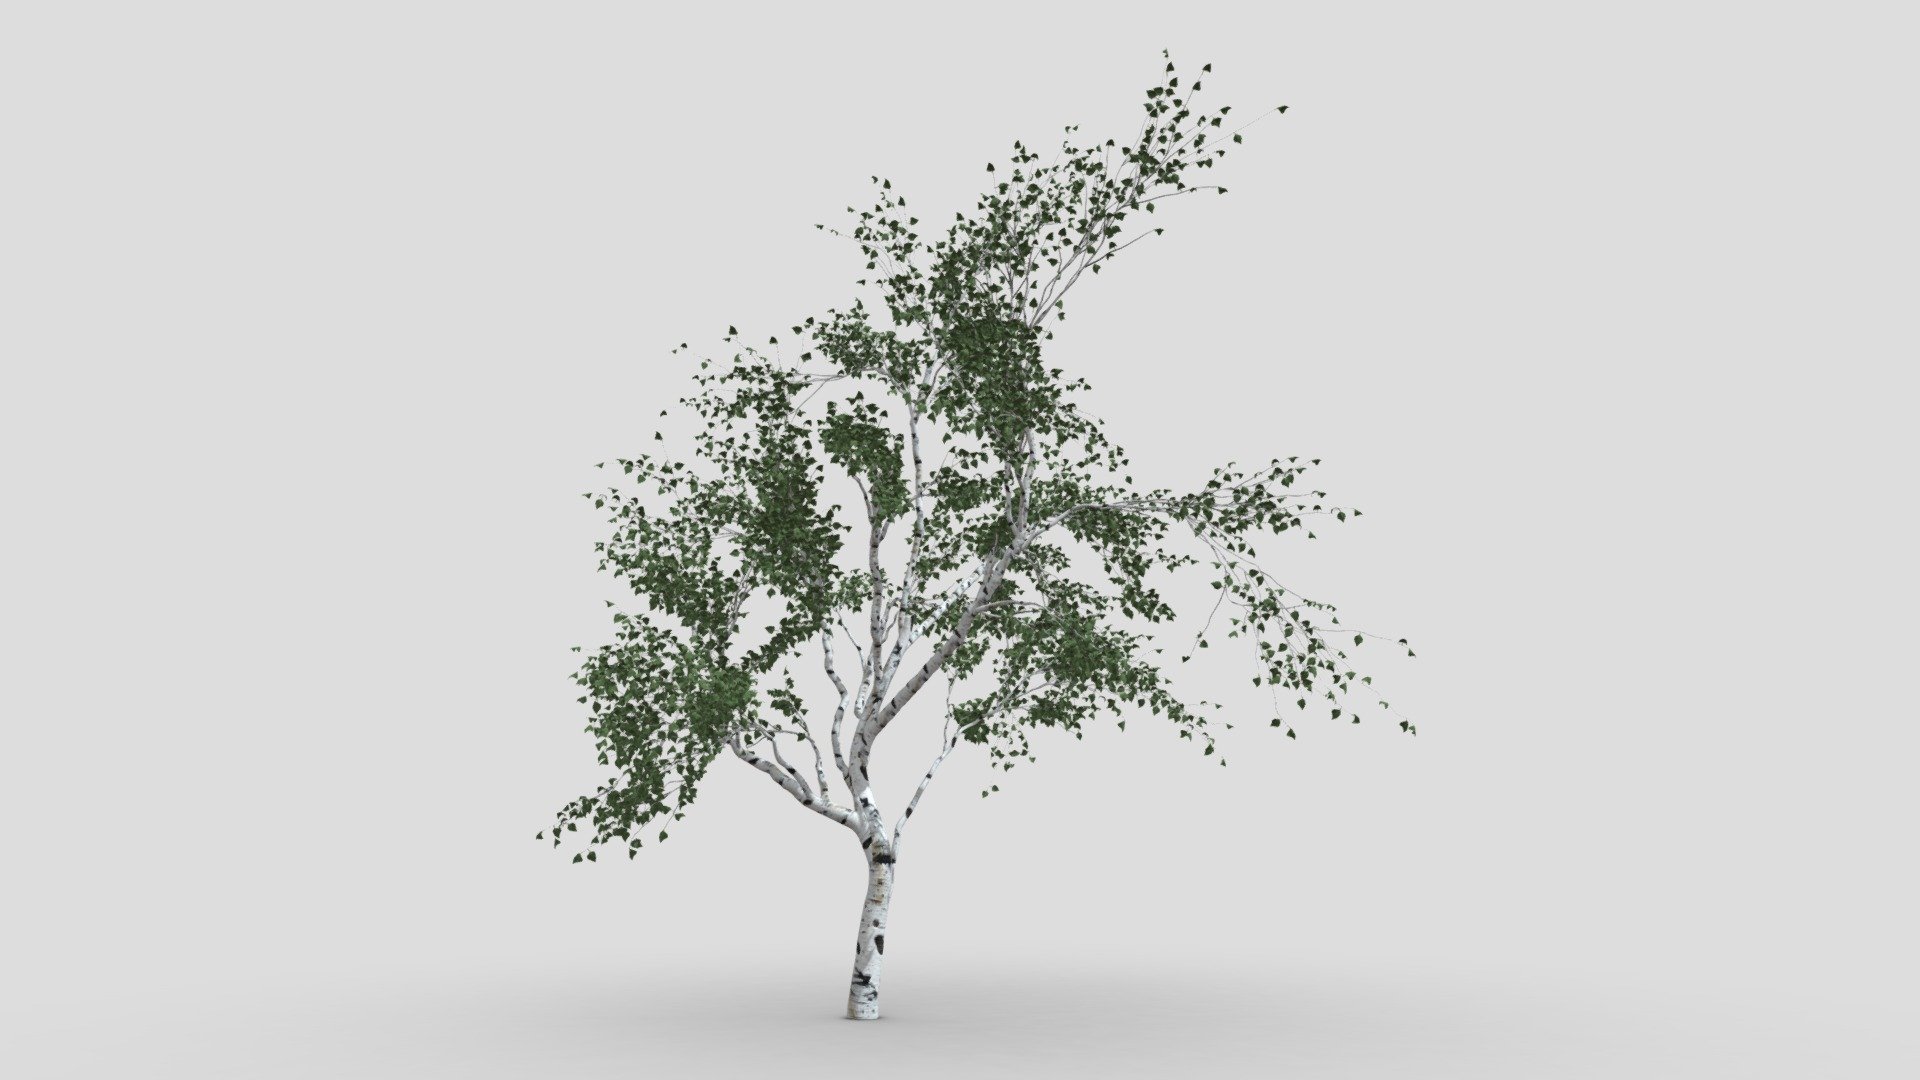 Betula papyrifera is a short-lived species of birch native to northern North America. Paper birch is named for the tree’s thin white bark, which often peels in paper like layers from the trunk.We Hope you will use this model in your projects. Let us to know your comments 3d model